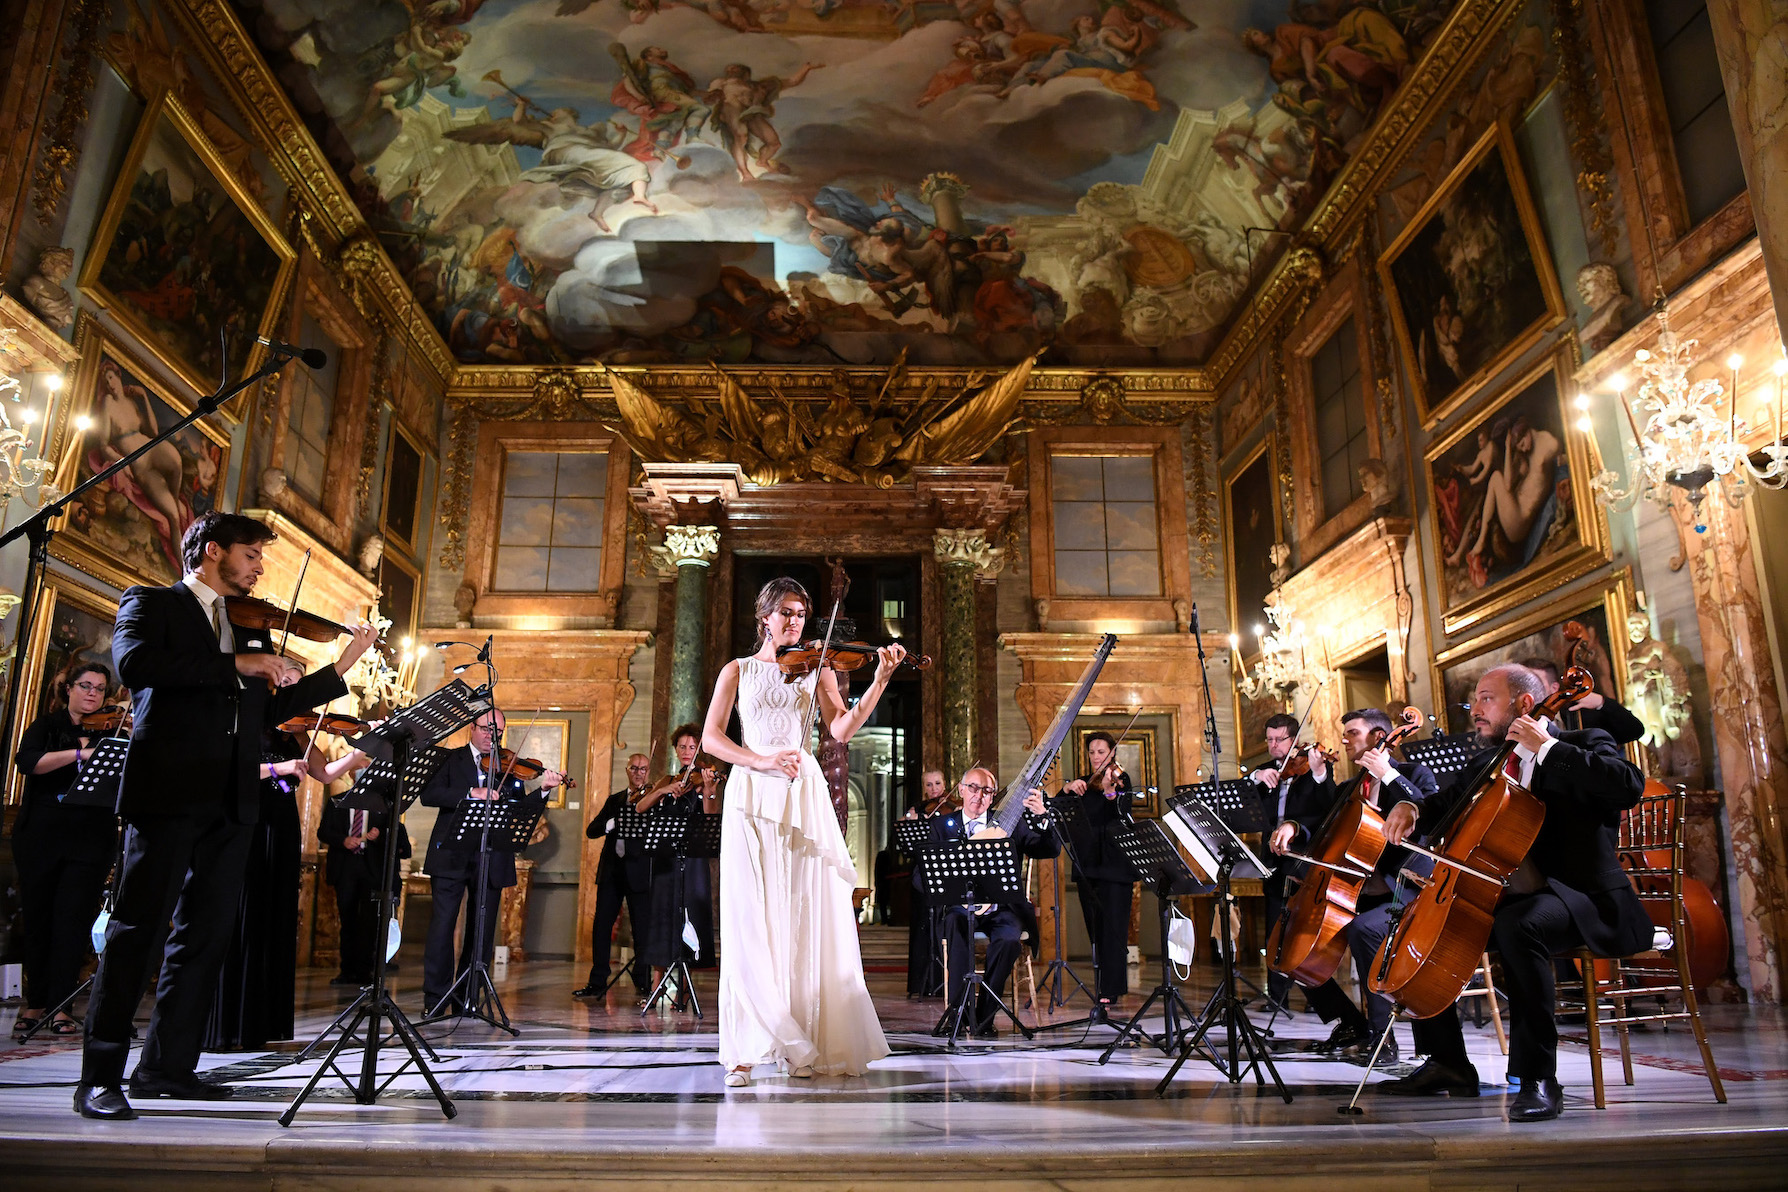 ROME, ITALY - SEPTEMBER 14: Francesca Dego performs during during Bulgari Barocco on September 14, 2020 in Rome, Italy. (Photo by Daniele Venturelli/Getty Images for Bulgari)